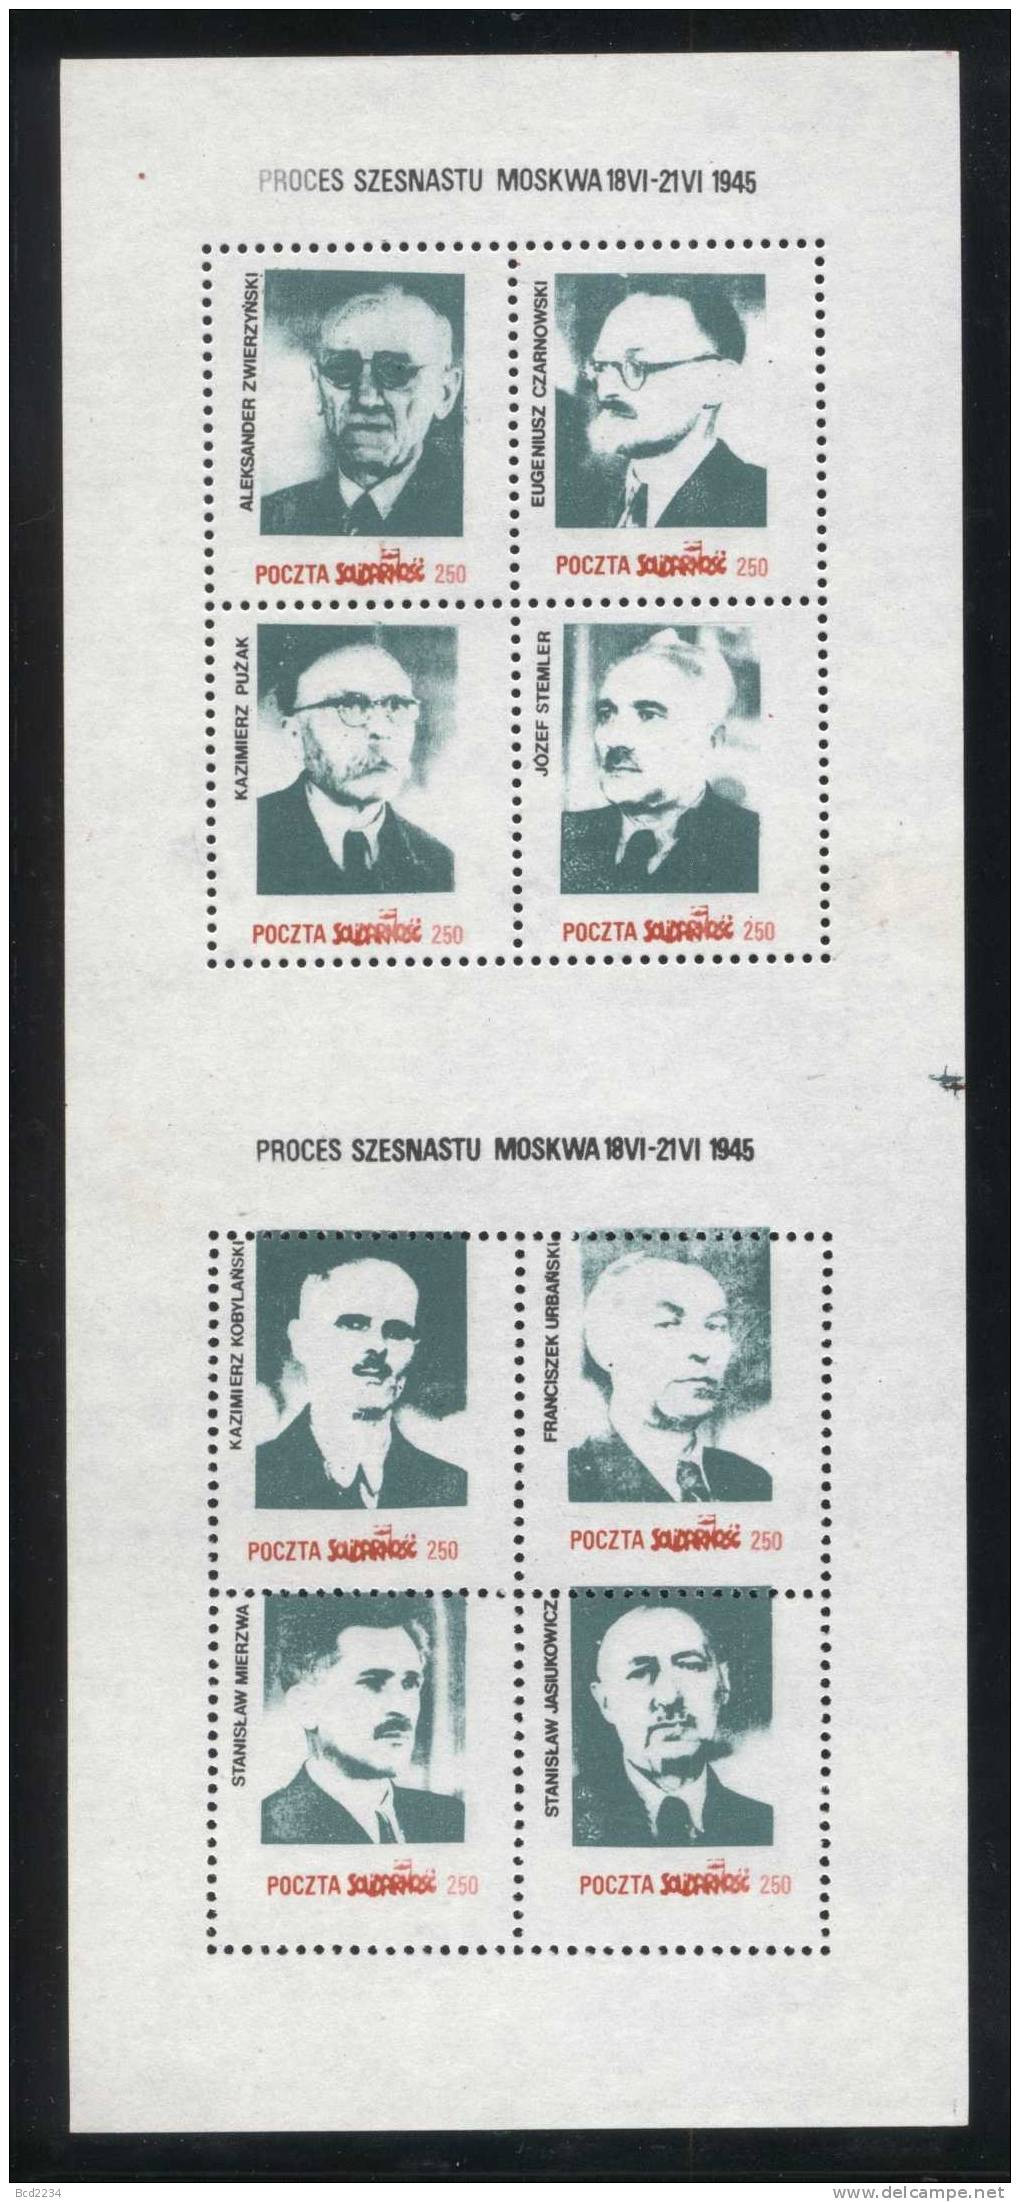 POLAND SOLIDARNOSC SOLIDARITY 2 SHEETS OF 8 GREEN RUSSIAN NKVD PRISONERS TRIAL OF THE 16 COMMUNISM (SOLID 118) - Solidarnosc Labels